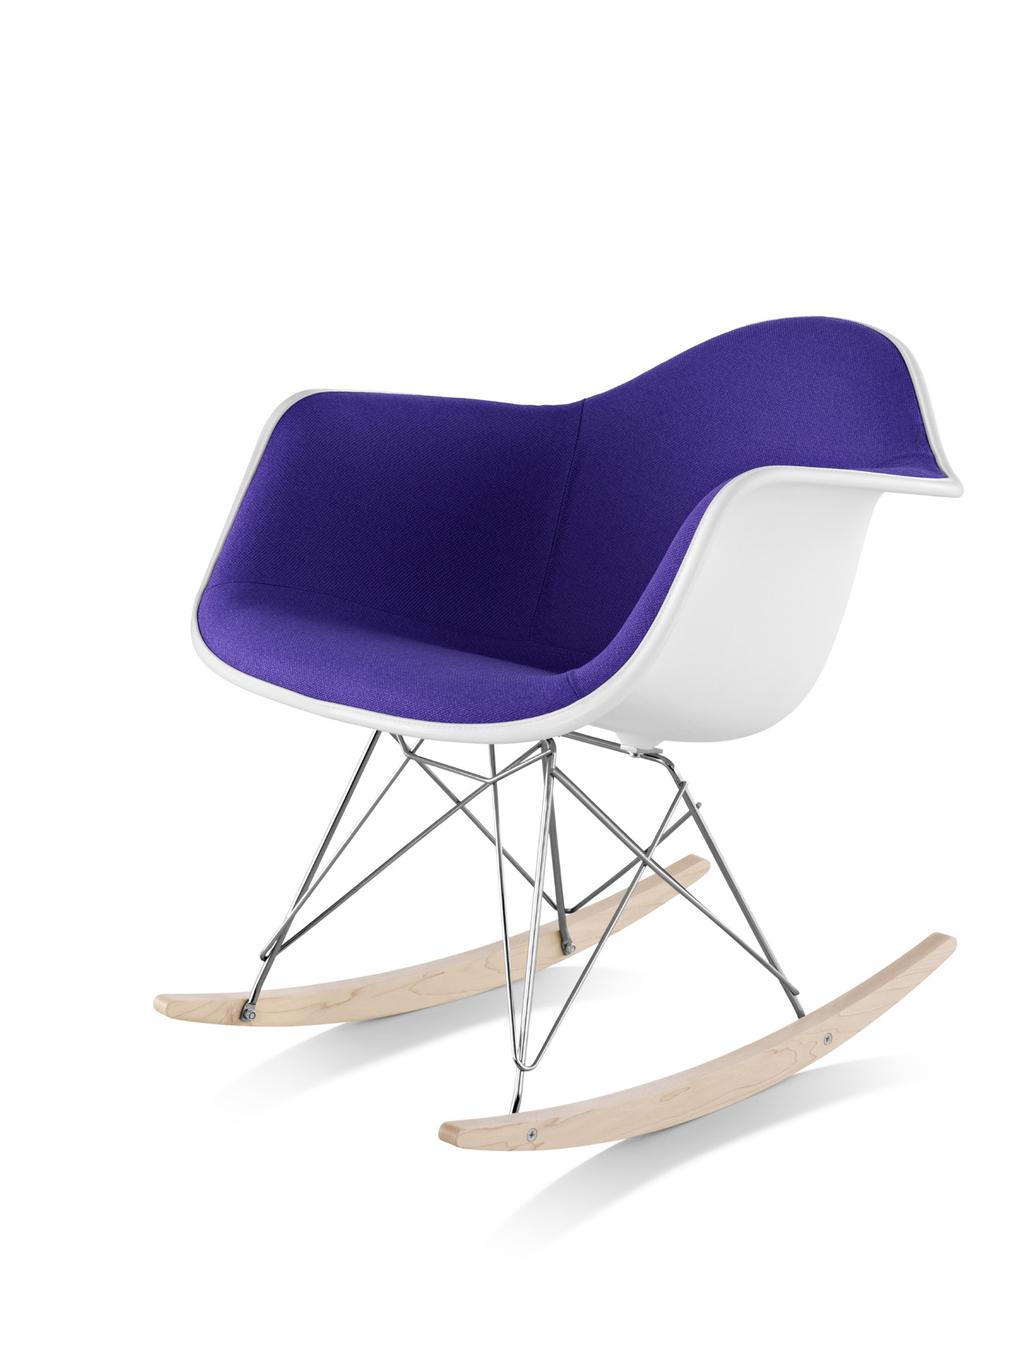 Eames Upholstered Molded Plastic Armchair Rocker Base Charles Eames said The role of the designer is that of a very good, thoughtful host anticipating the needs of his guests.